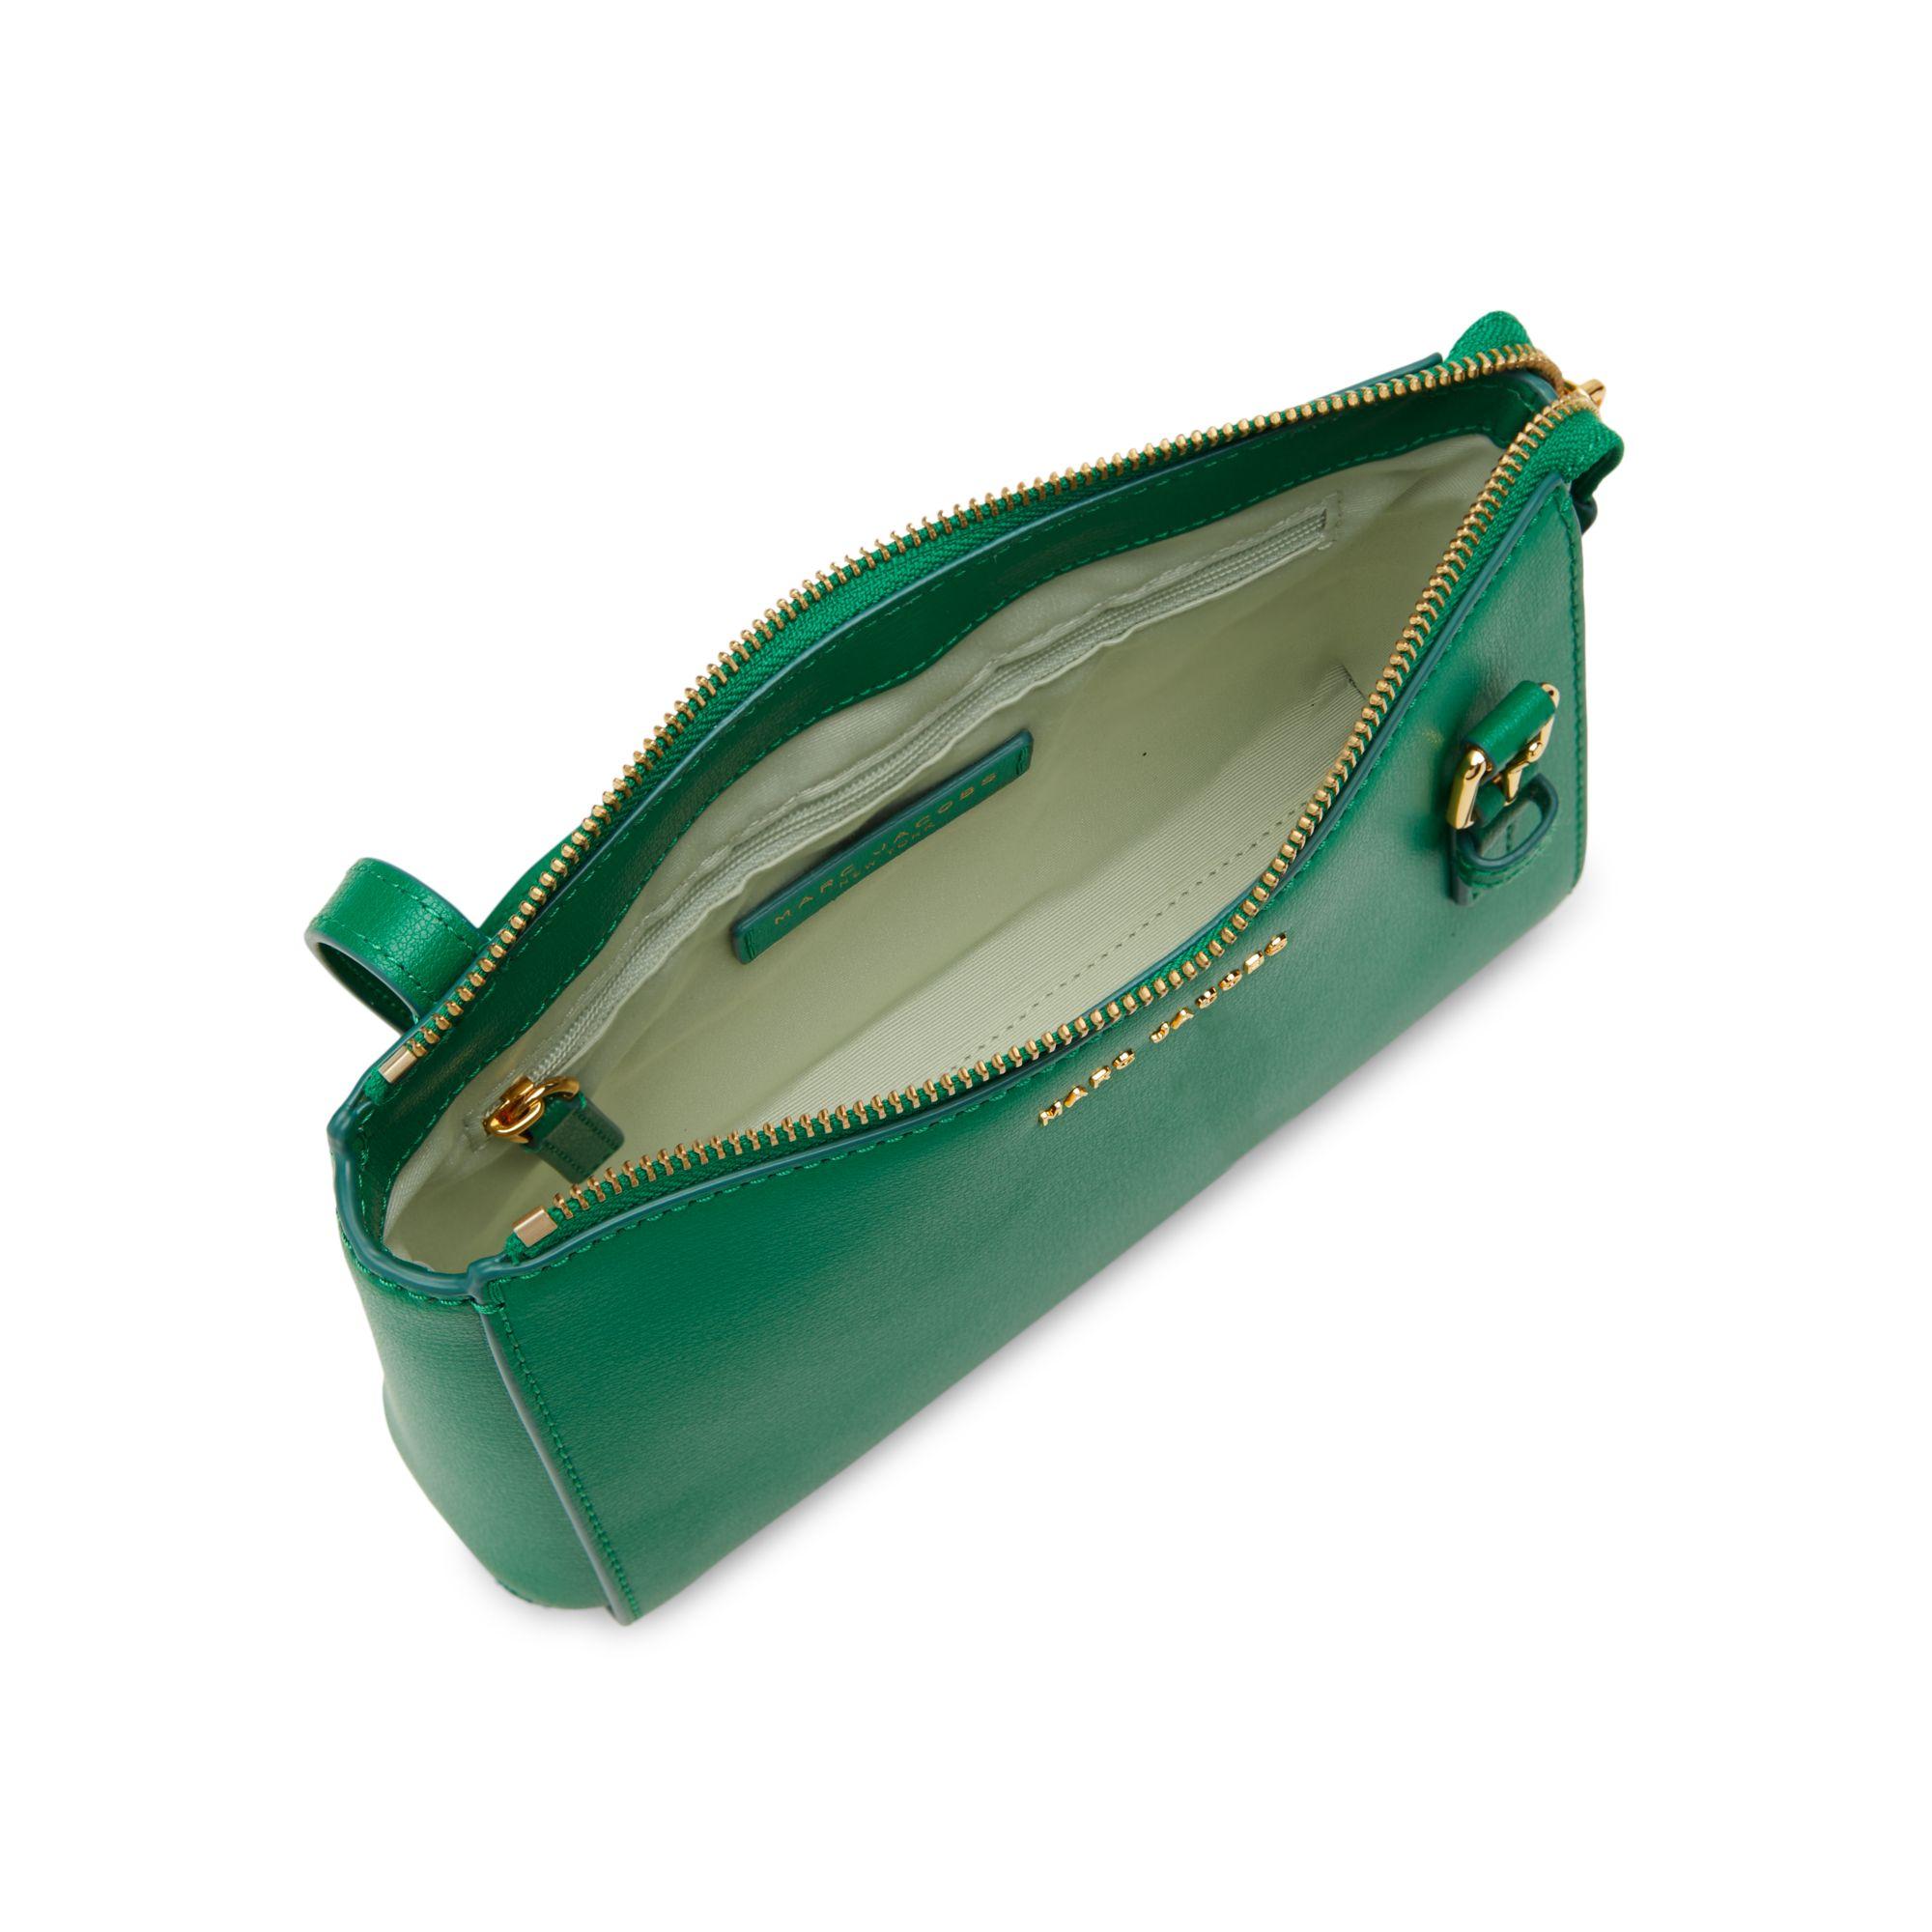 Marc by Marc Jacobs Leather Crossbody Bag In Soccer Pitch Green, $260, STYLEBOP.com